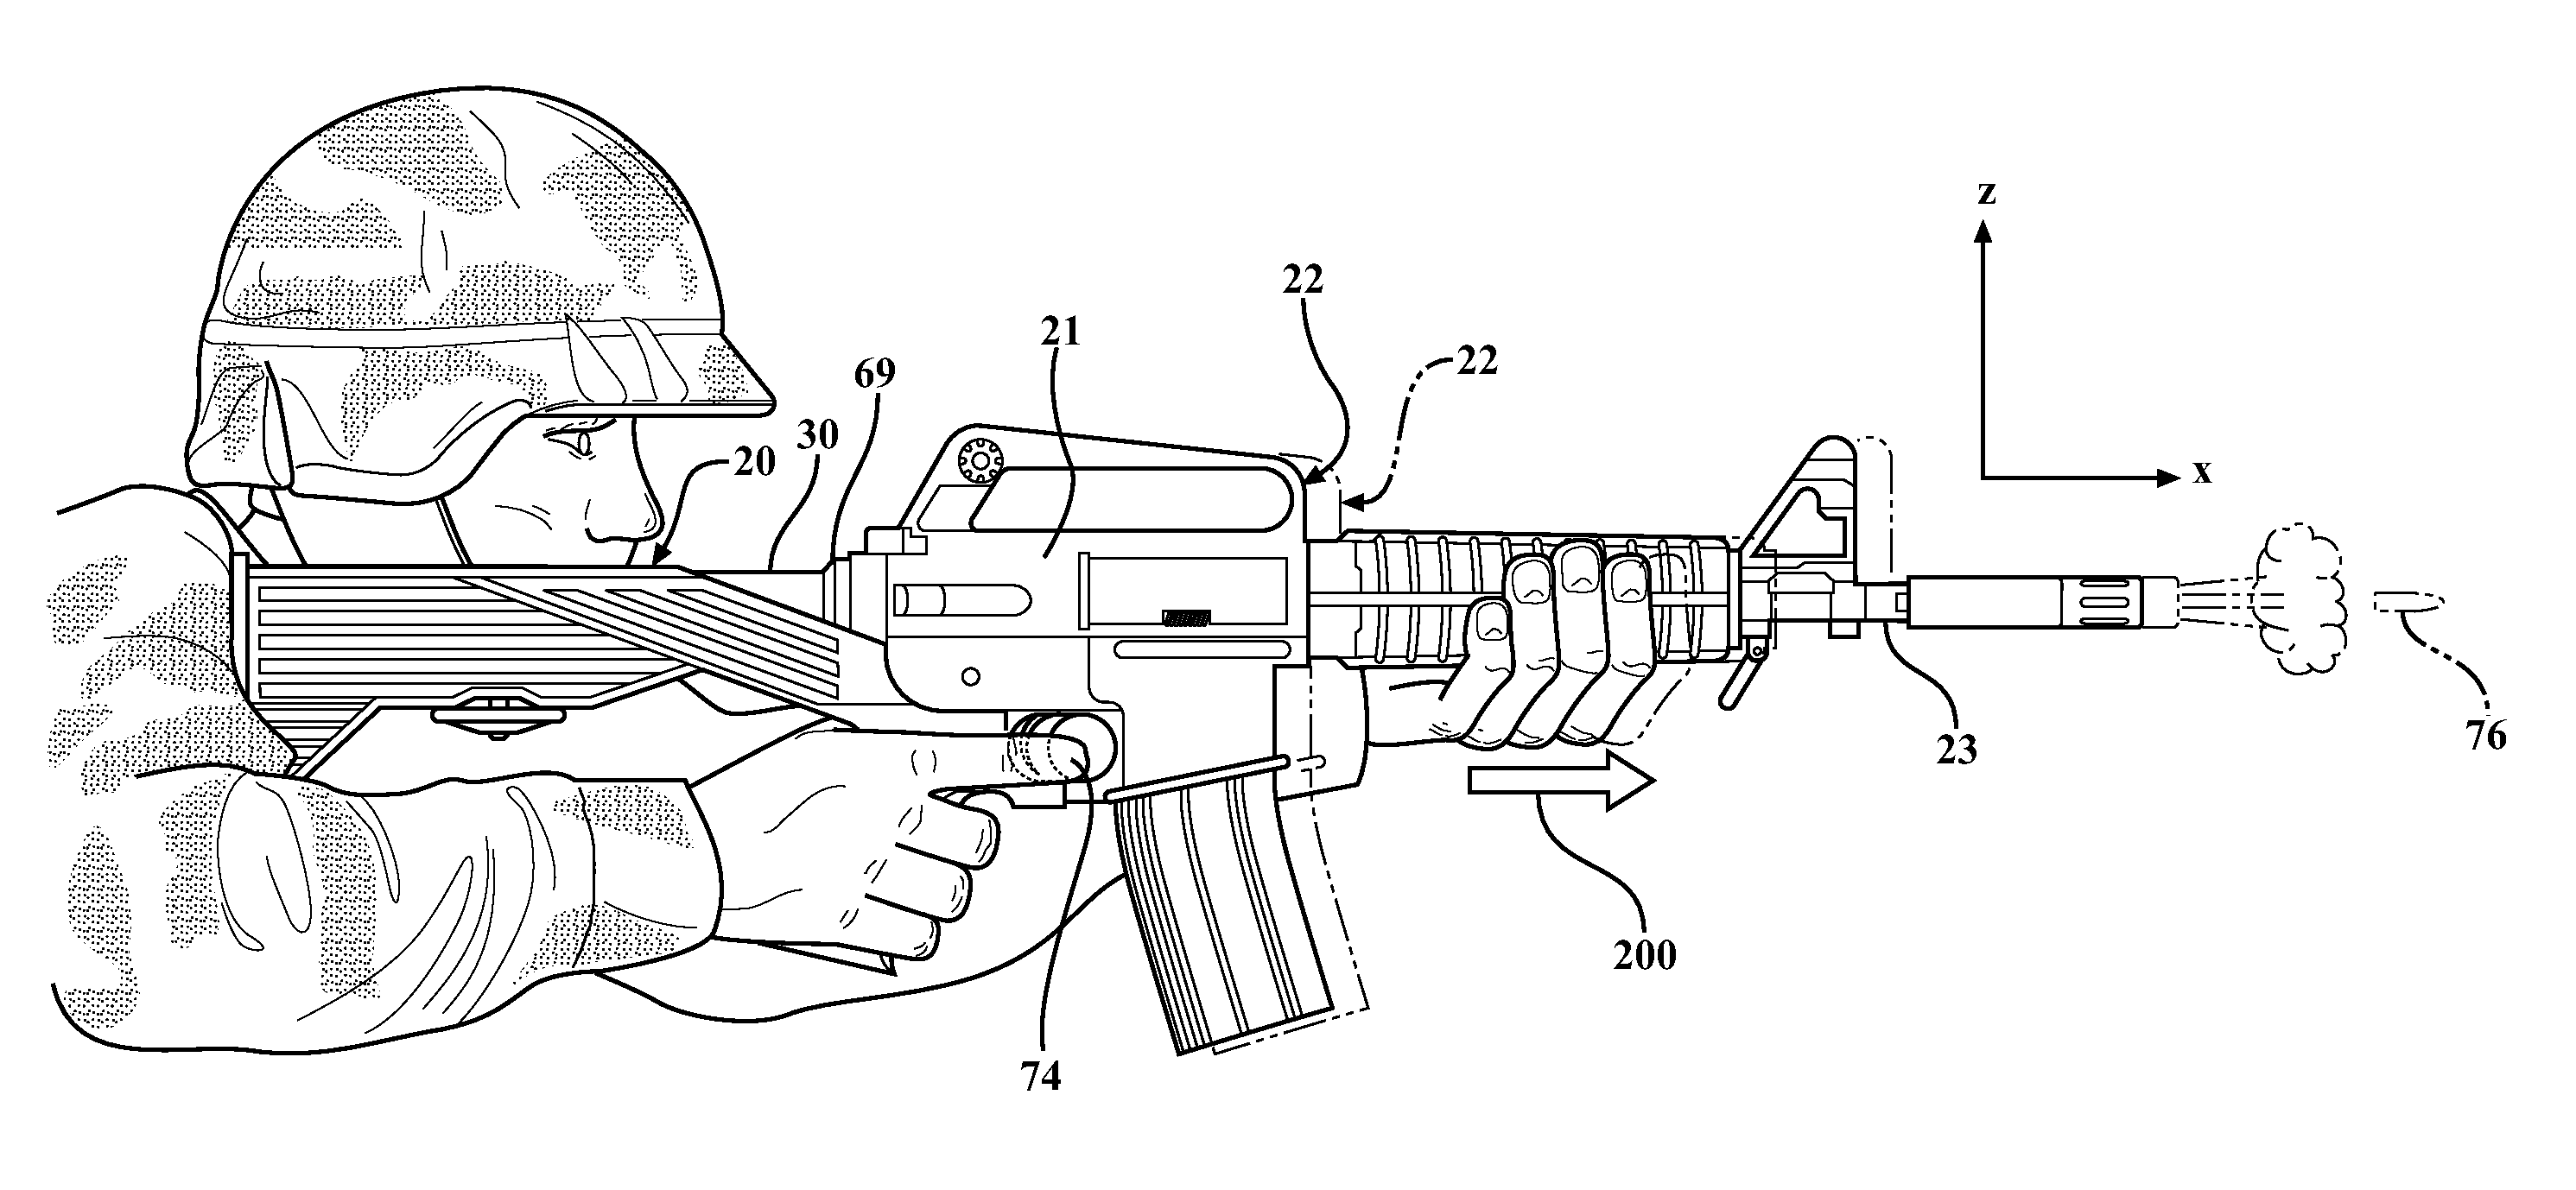 Interface system for firearm with sliding stock